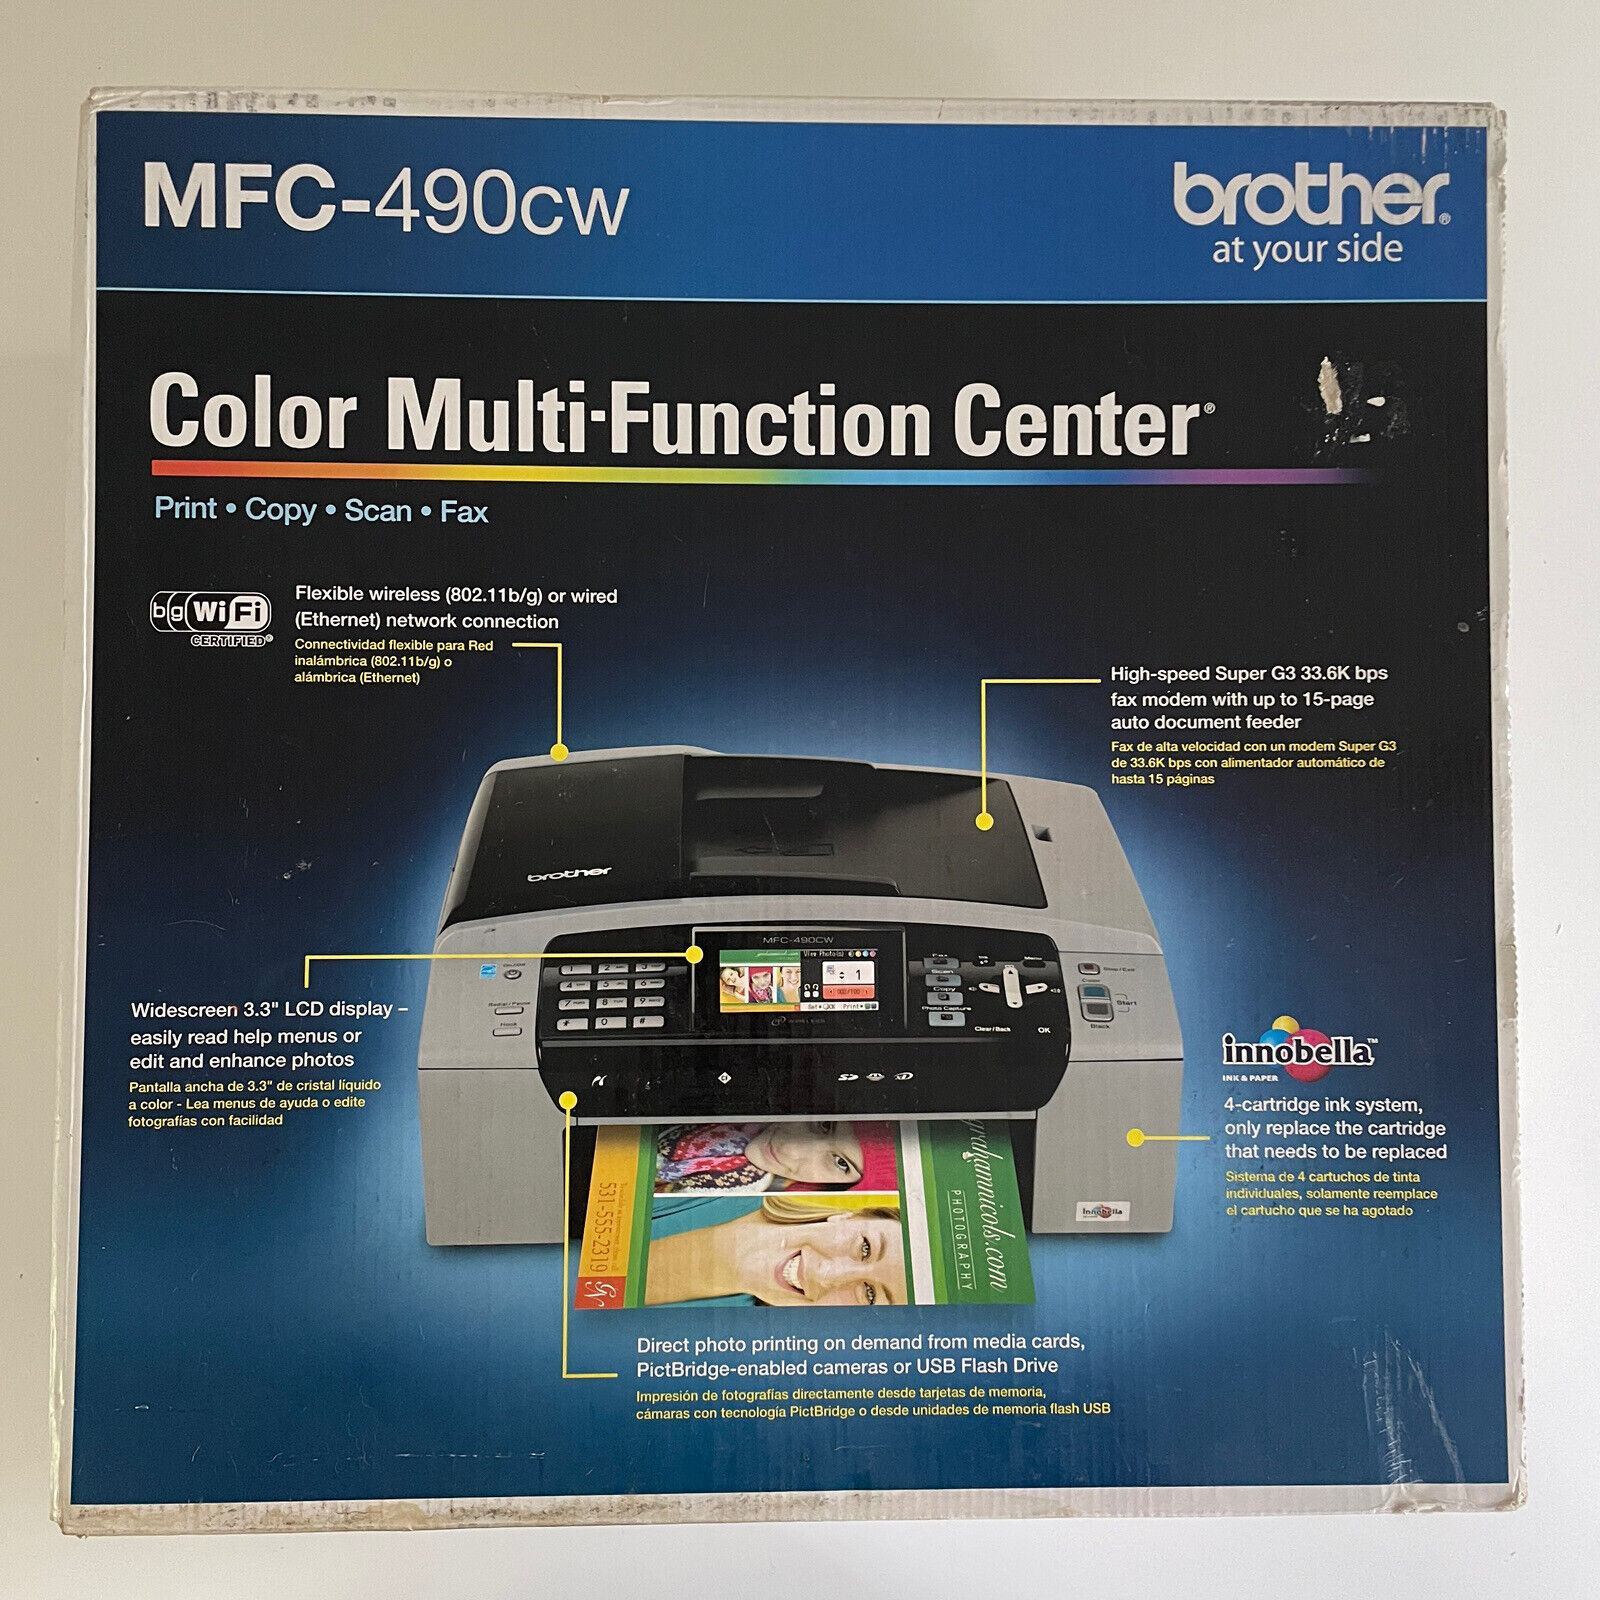 Brother MFC-490CW Color Inkjet Wireless All-in-One Printer Scanner Fax Copier. Available Now for 199.99